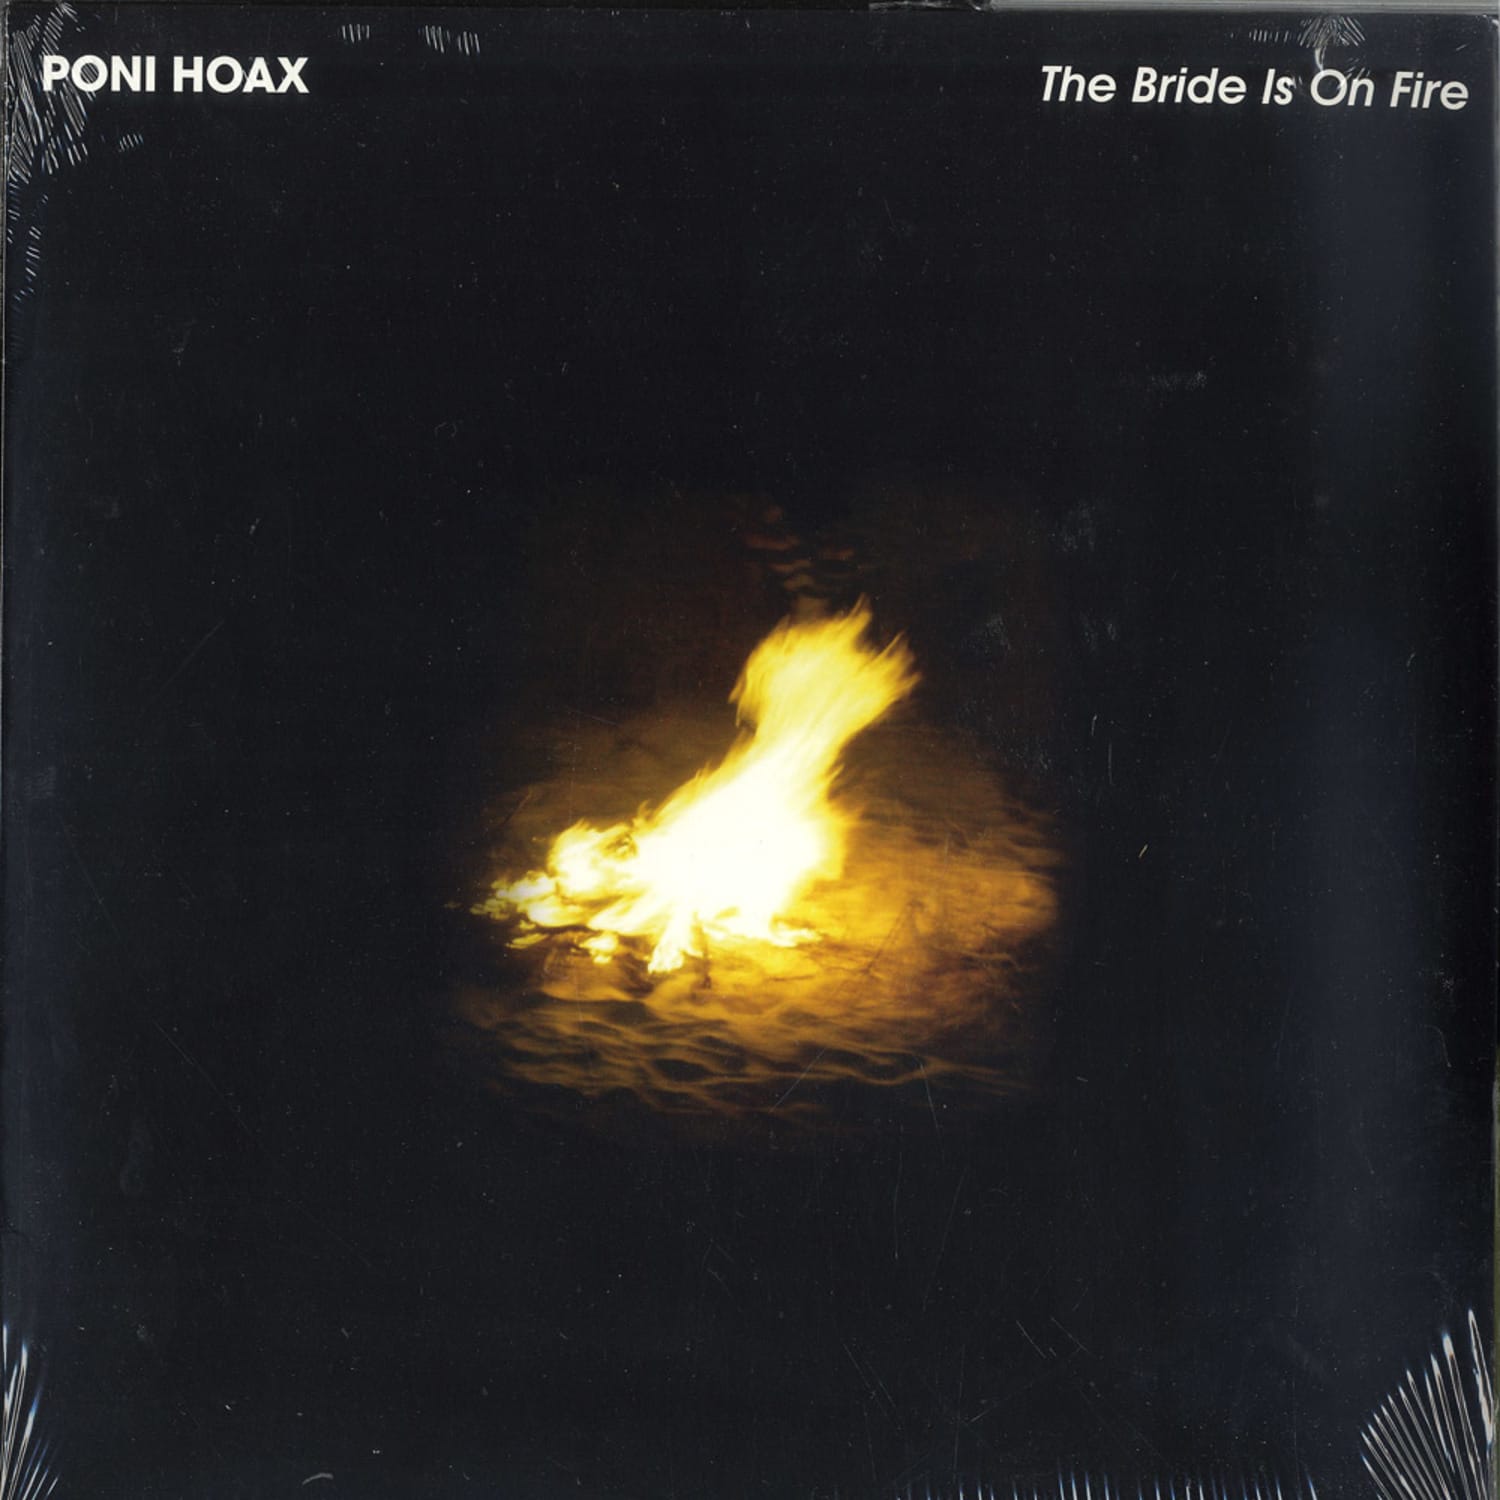 Poni Hoax - THE BRIDE IS ON FIRE EP